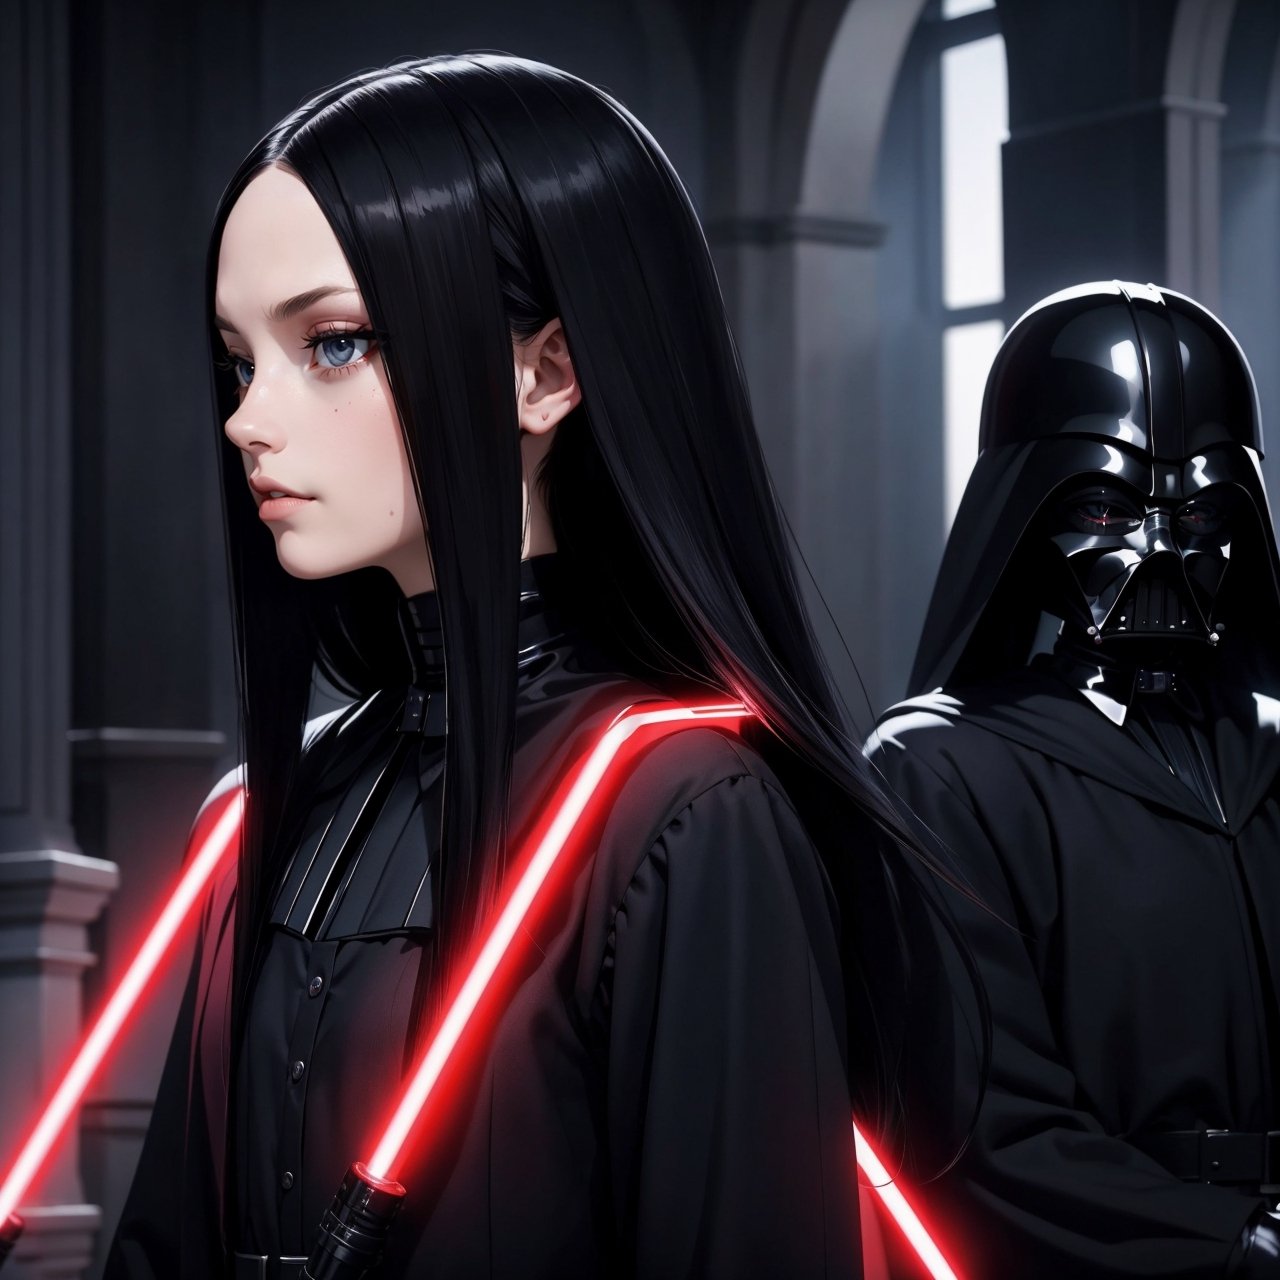 Wednesday Addams and Dark Vader, beautiful woman, young 21 years old, athletic body, sith lord clothes, in a battle with Dark Vader